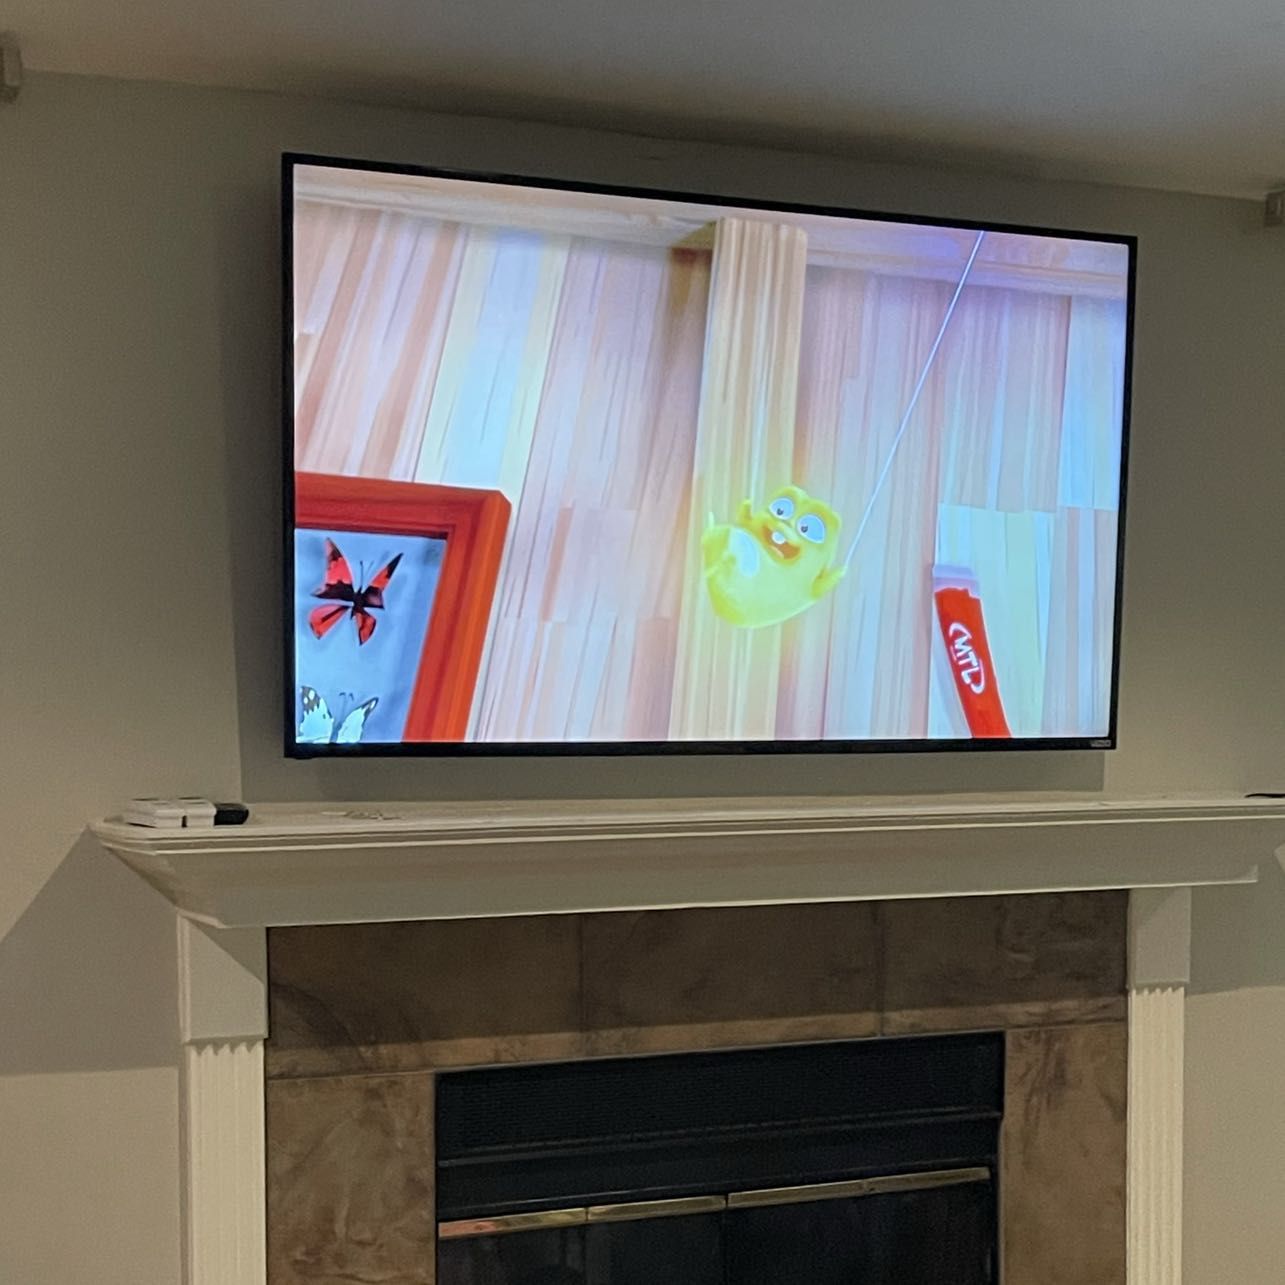 No cords/ power outlet added behind tv portfolio